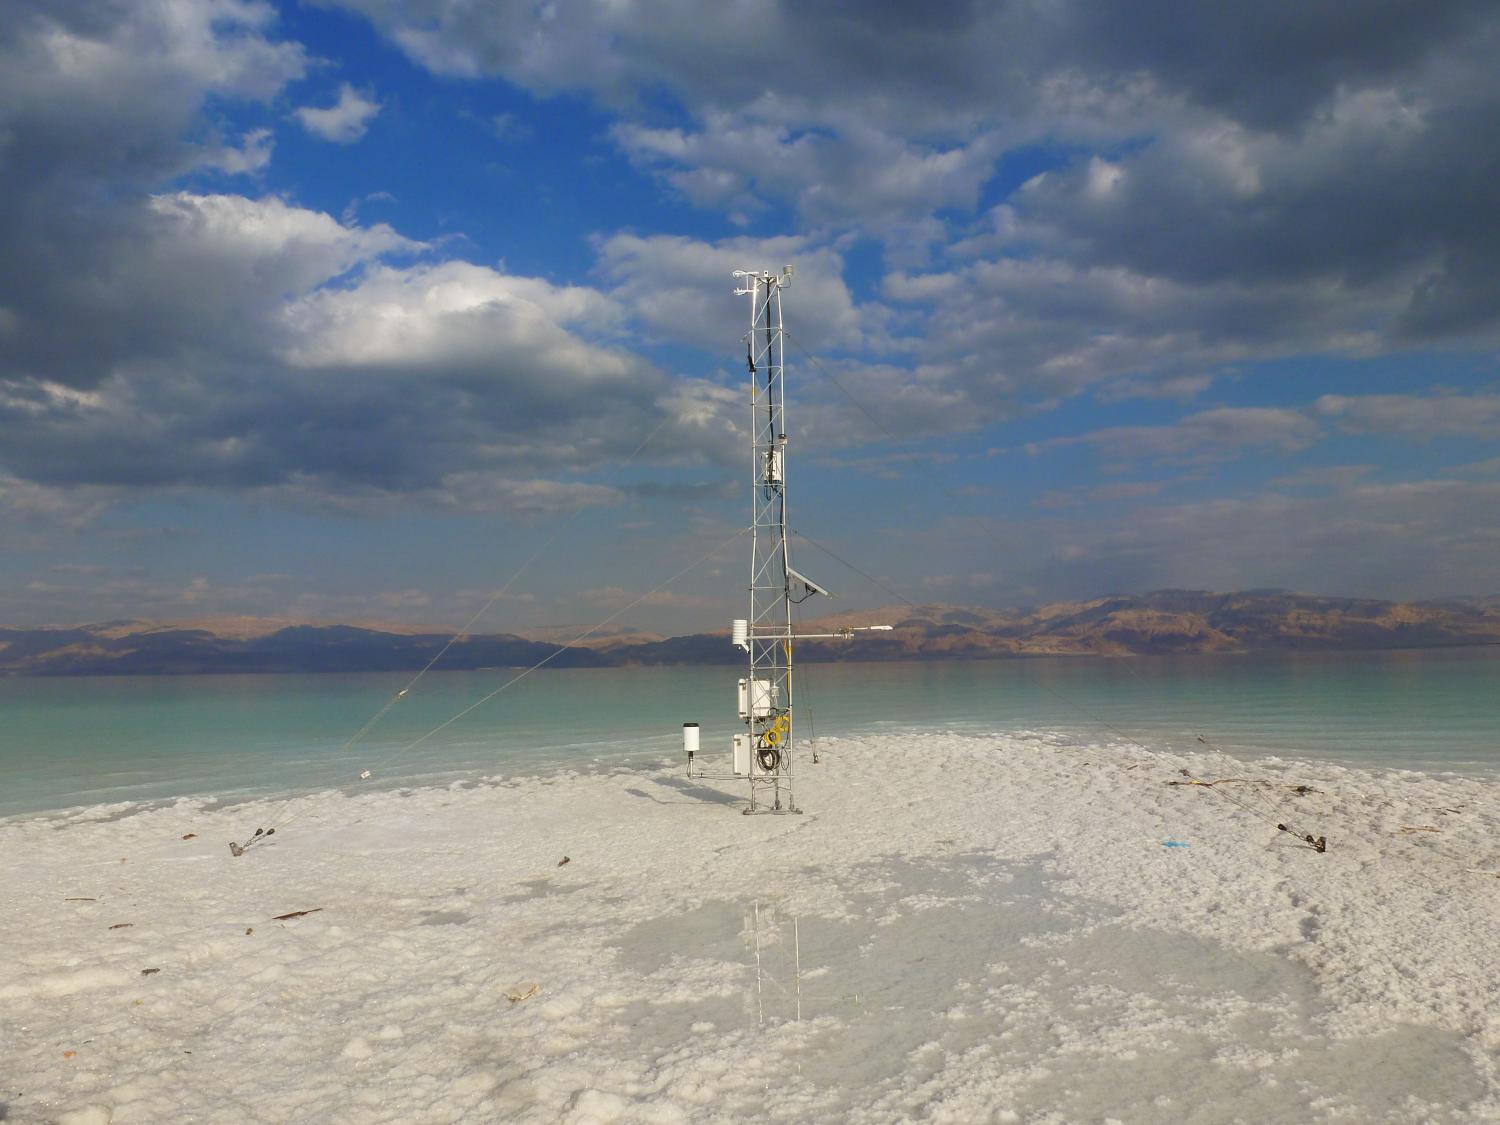 The Dead Sea—environmental research on the edge of extremes